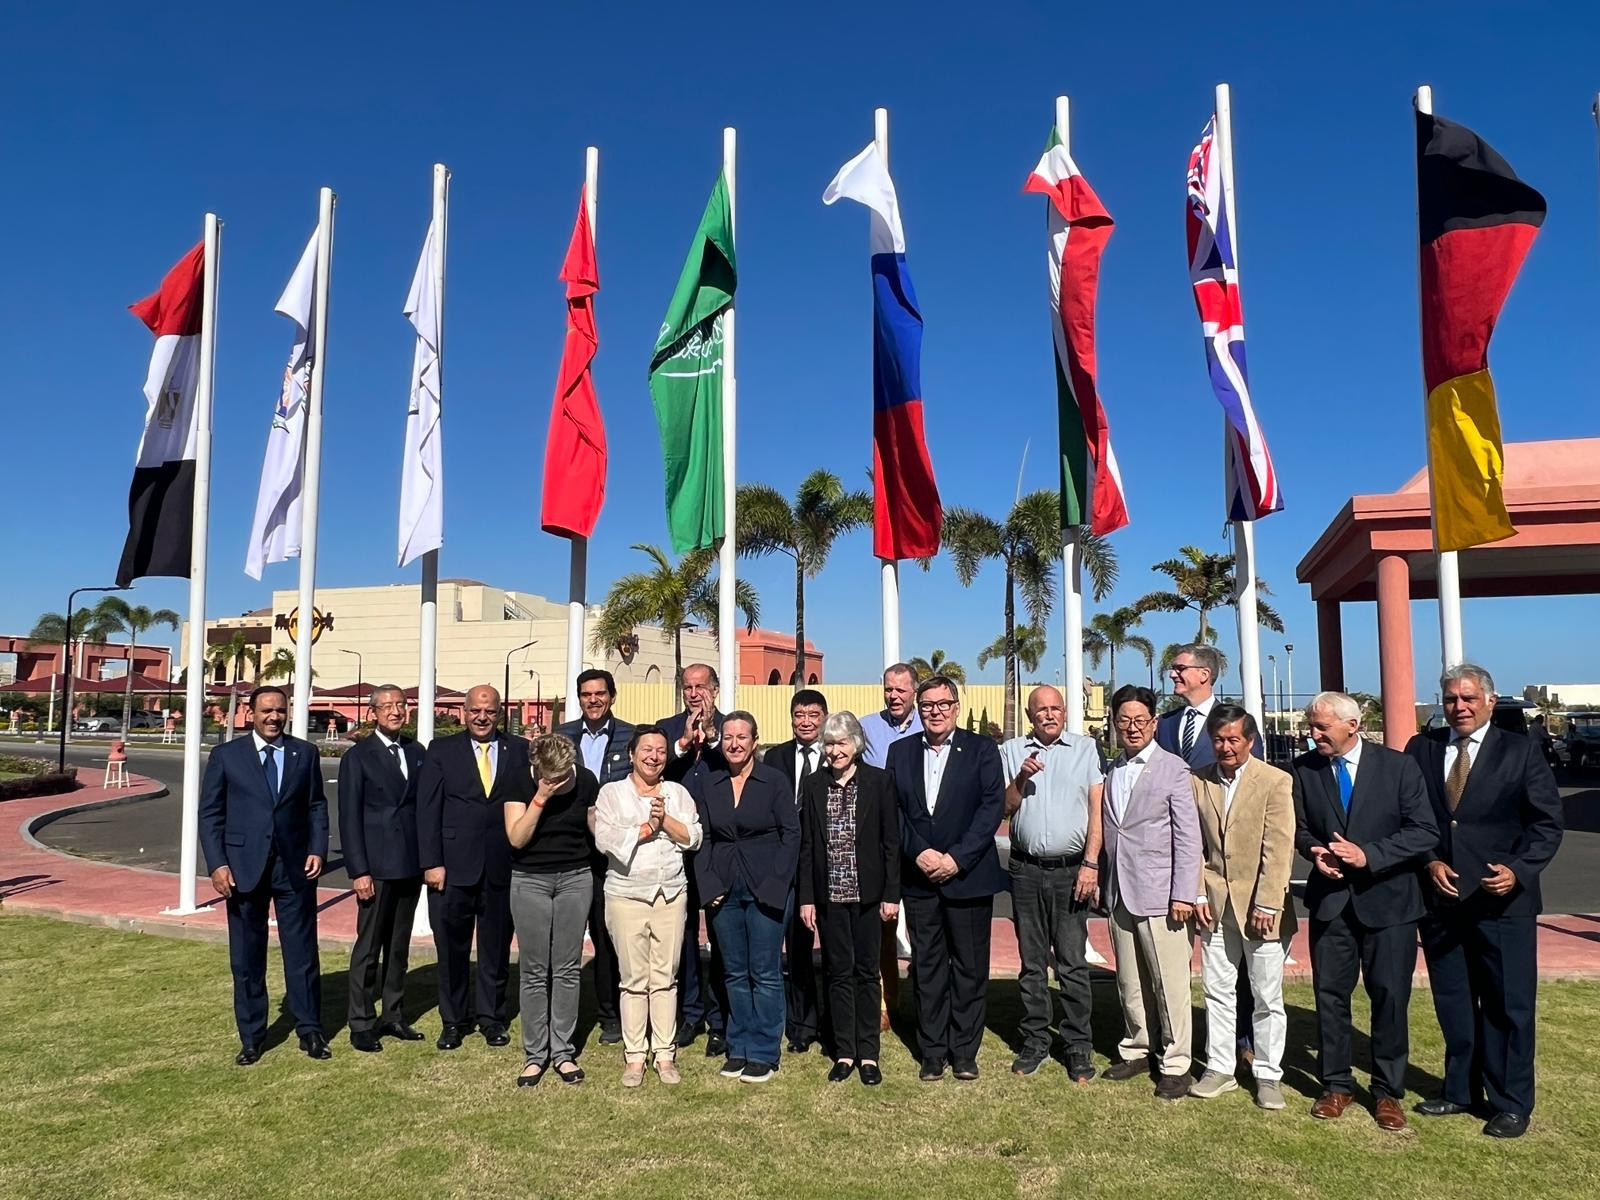 The ISSF Executive Committee held its first meeting today under new President Luciano Rossi in Sharm El-Sheikh ©ISSF